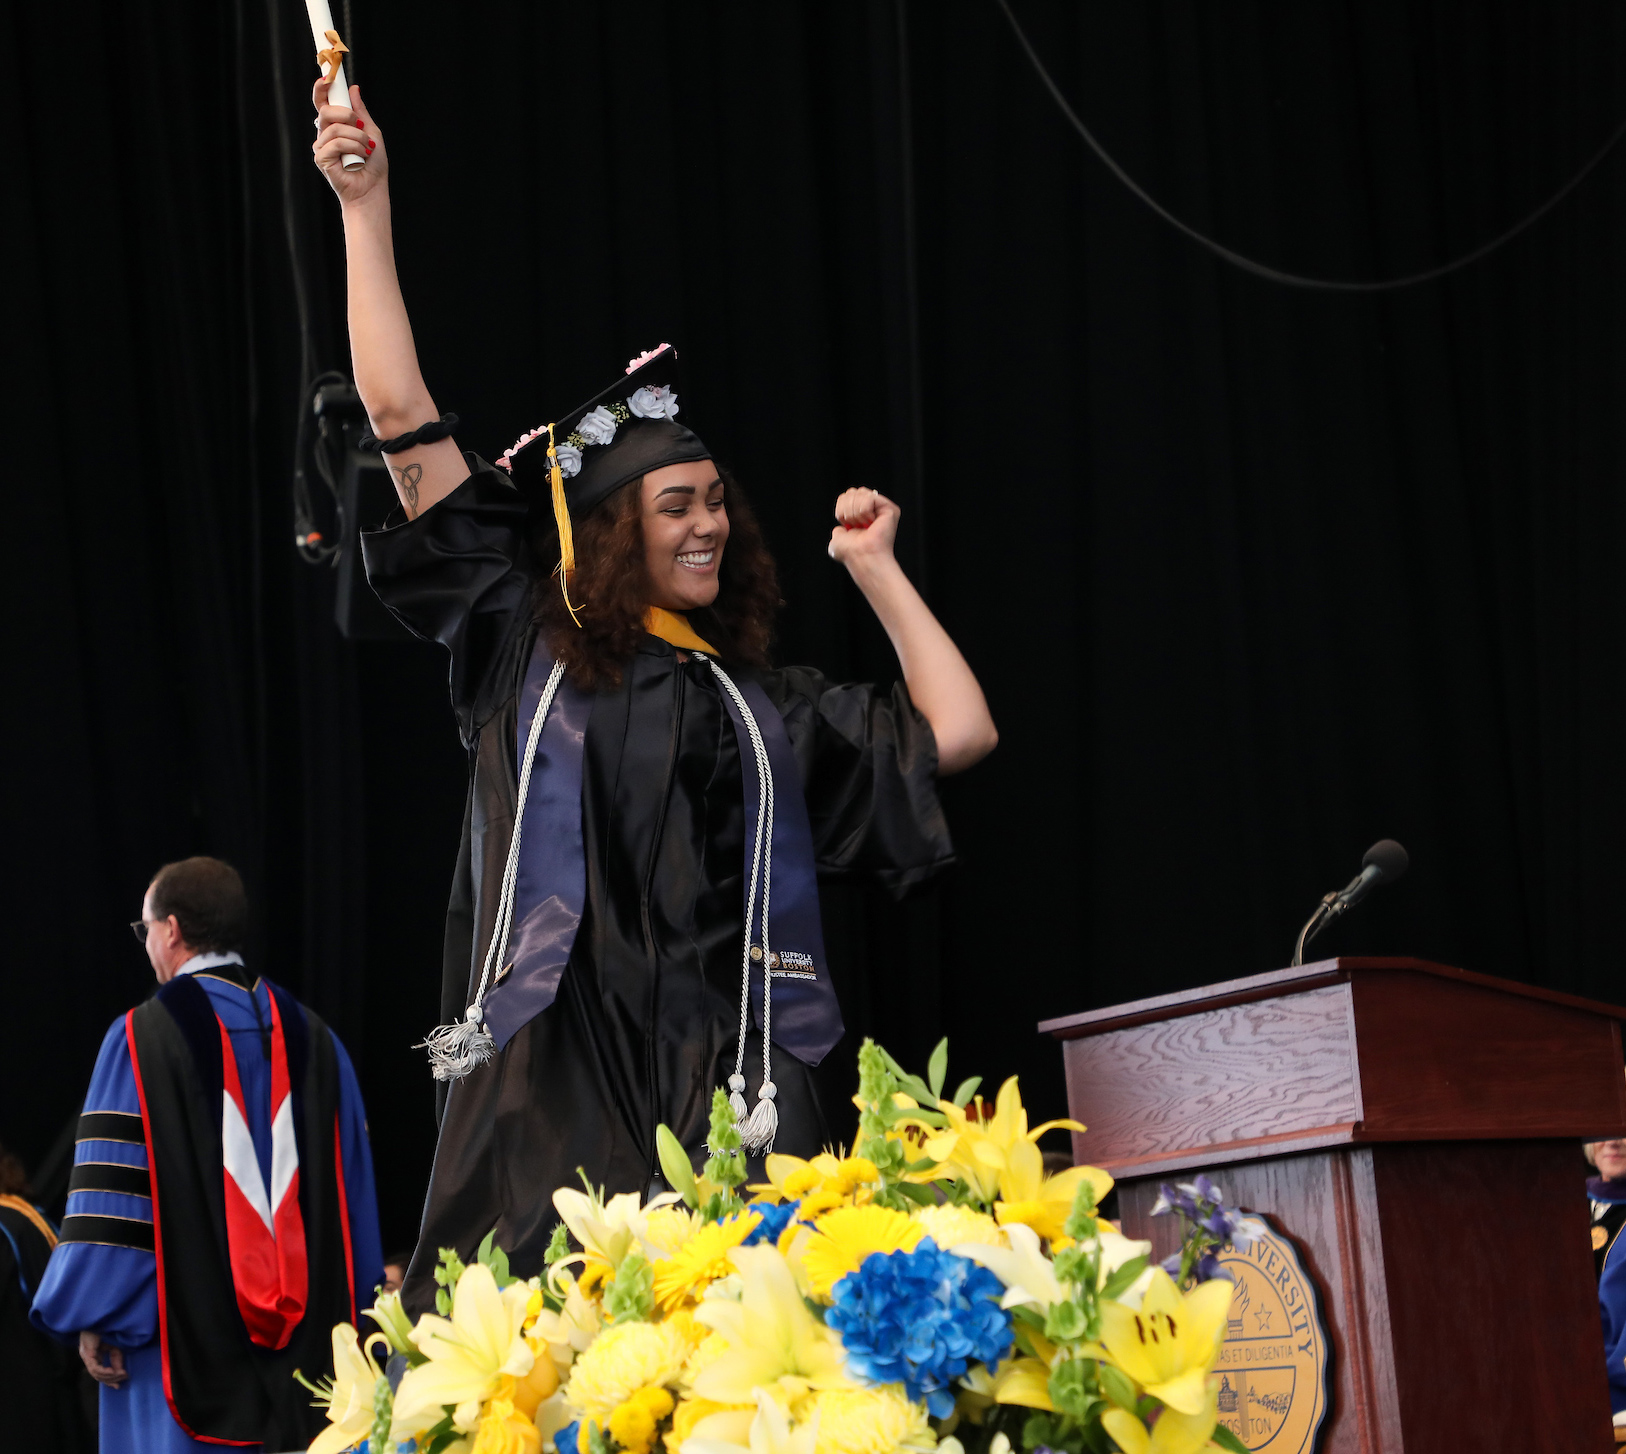 Brenna lifts her scroll high above her head as she crosses the stage at Commencement.